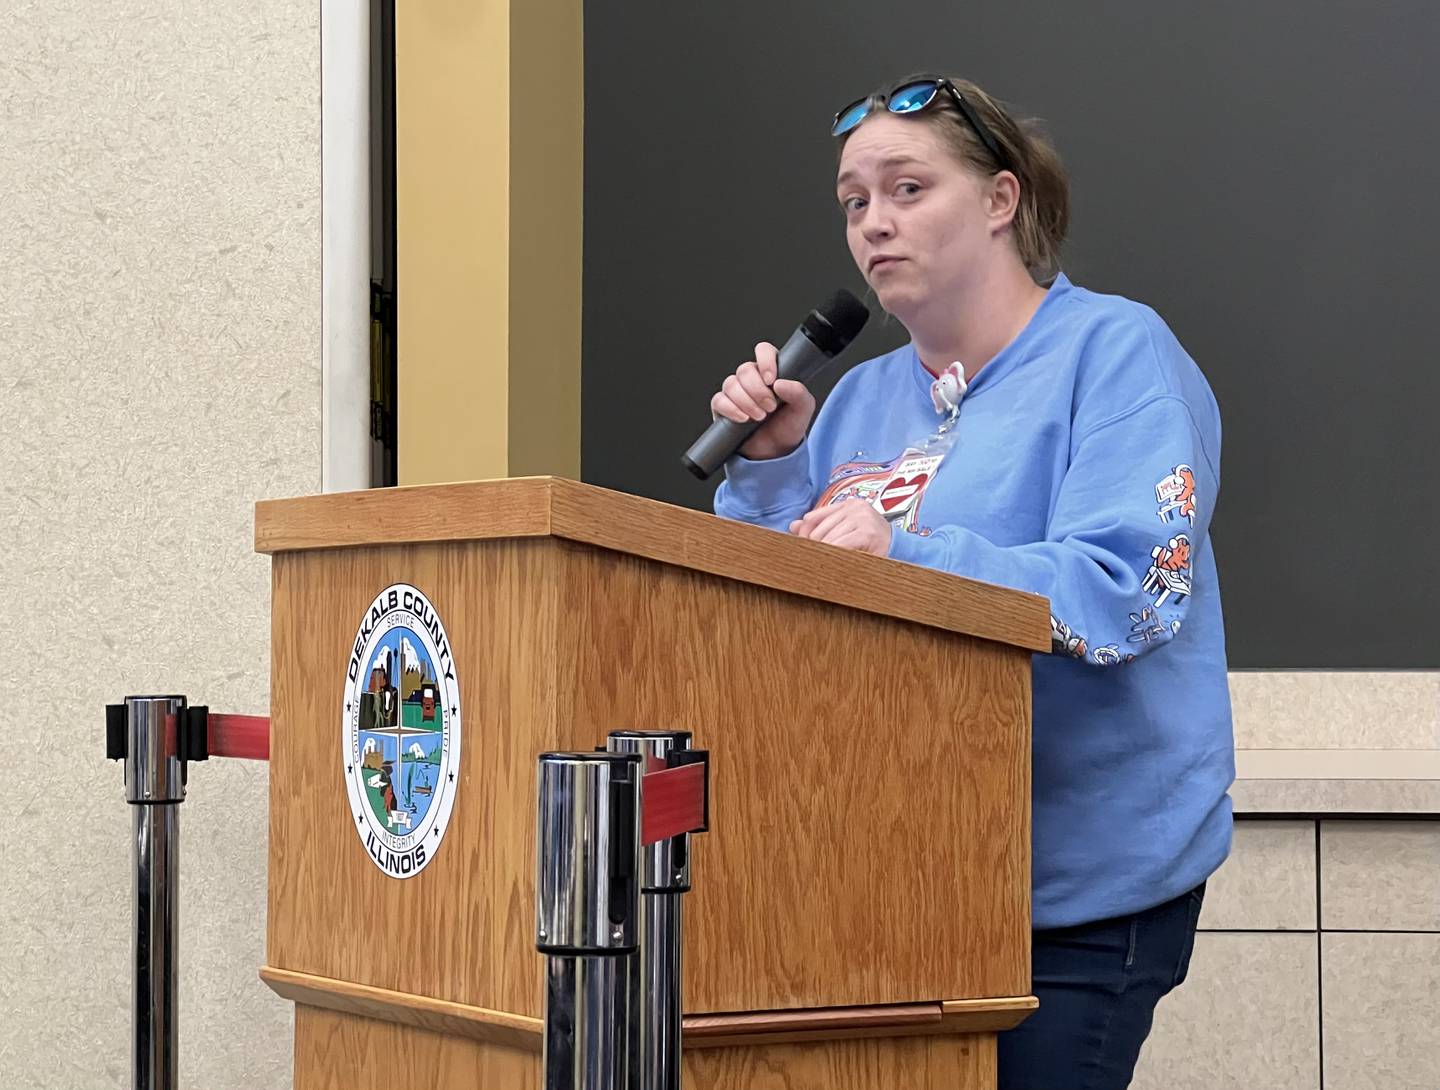 On Sept. 20, 2023 – more than a year after she first appealed to the DeKalb County Board – Hannah Williams said she is still against the sale of the DeKalb County Rehabilitation and Nursing Center to a private business, regardless of the buyer.